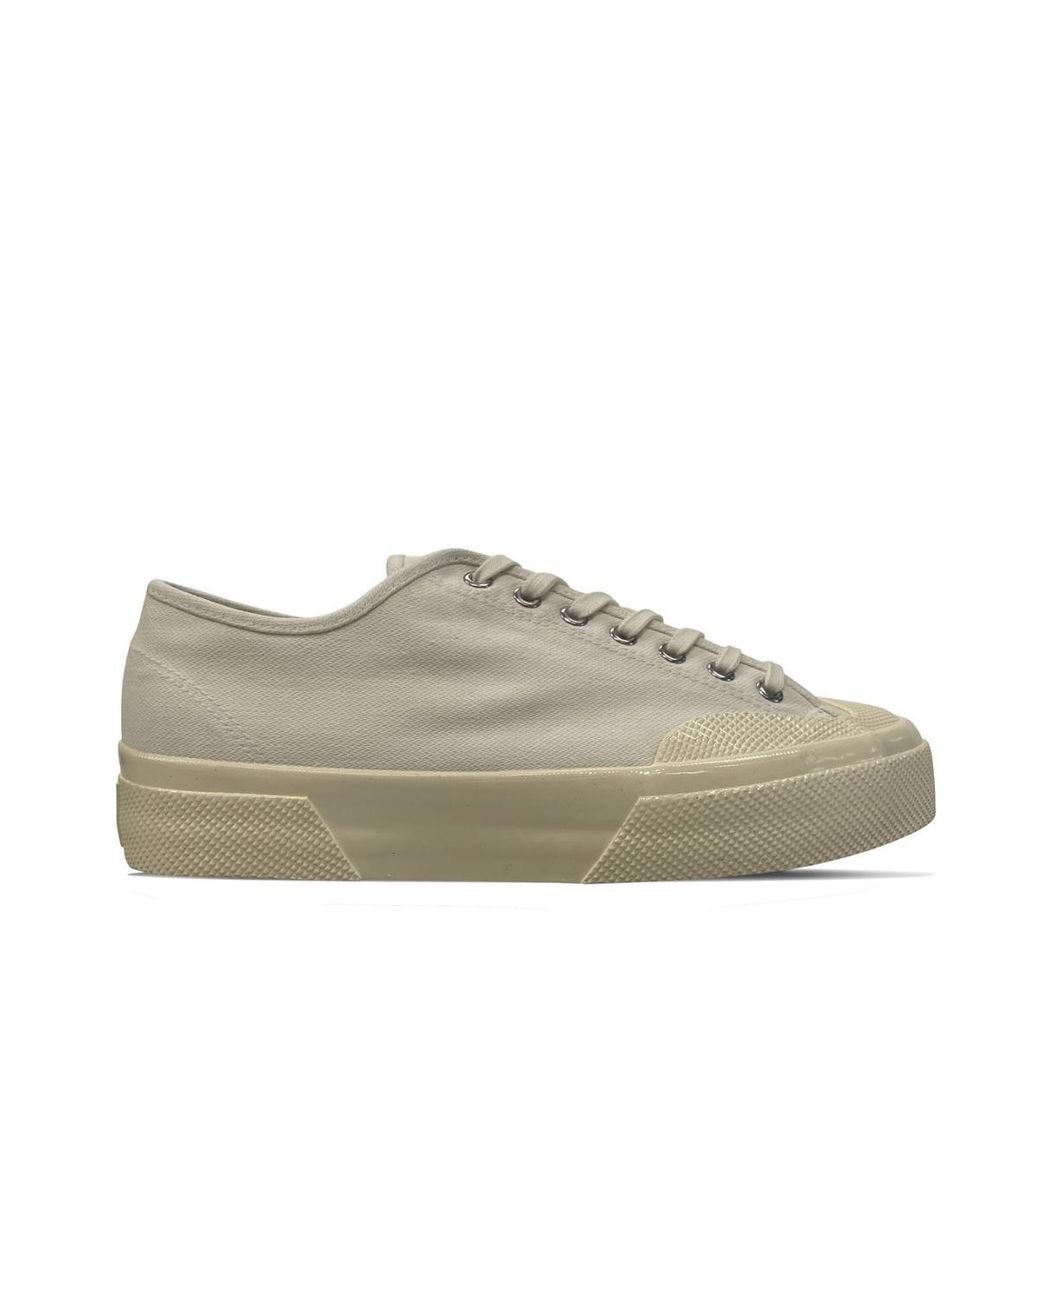 Superga Artifact By 2432 Collect Workwear White-off White | Lyst